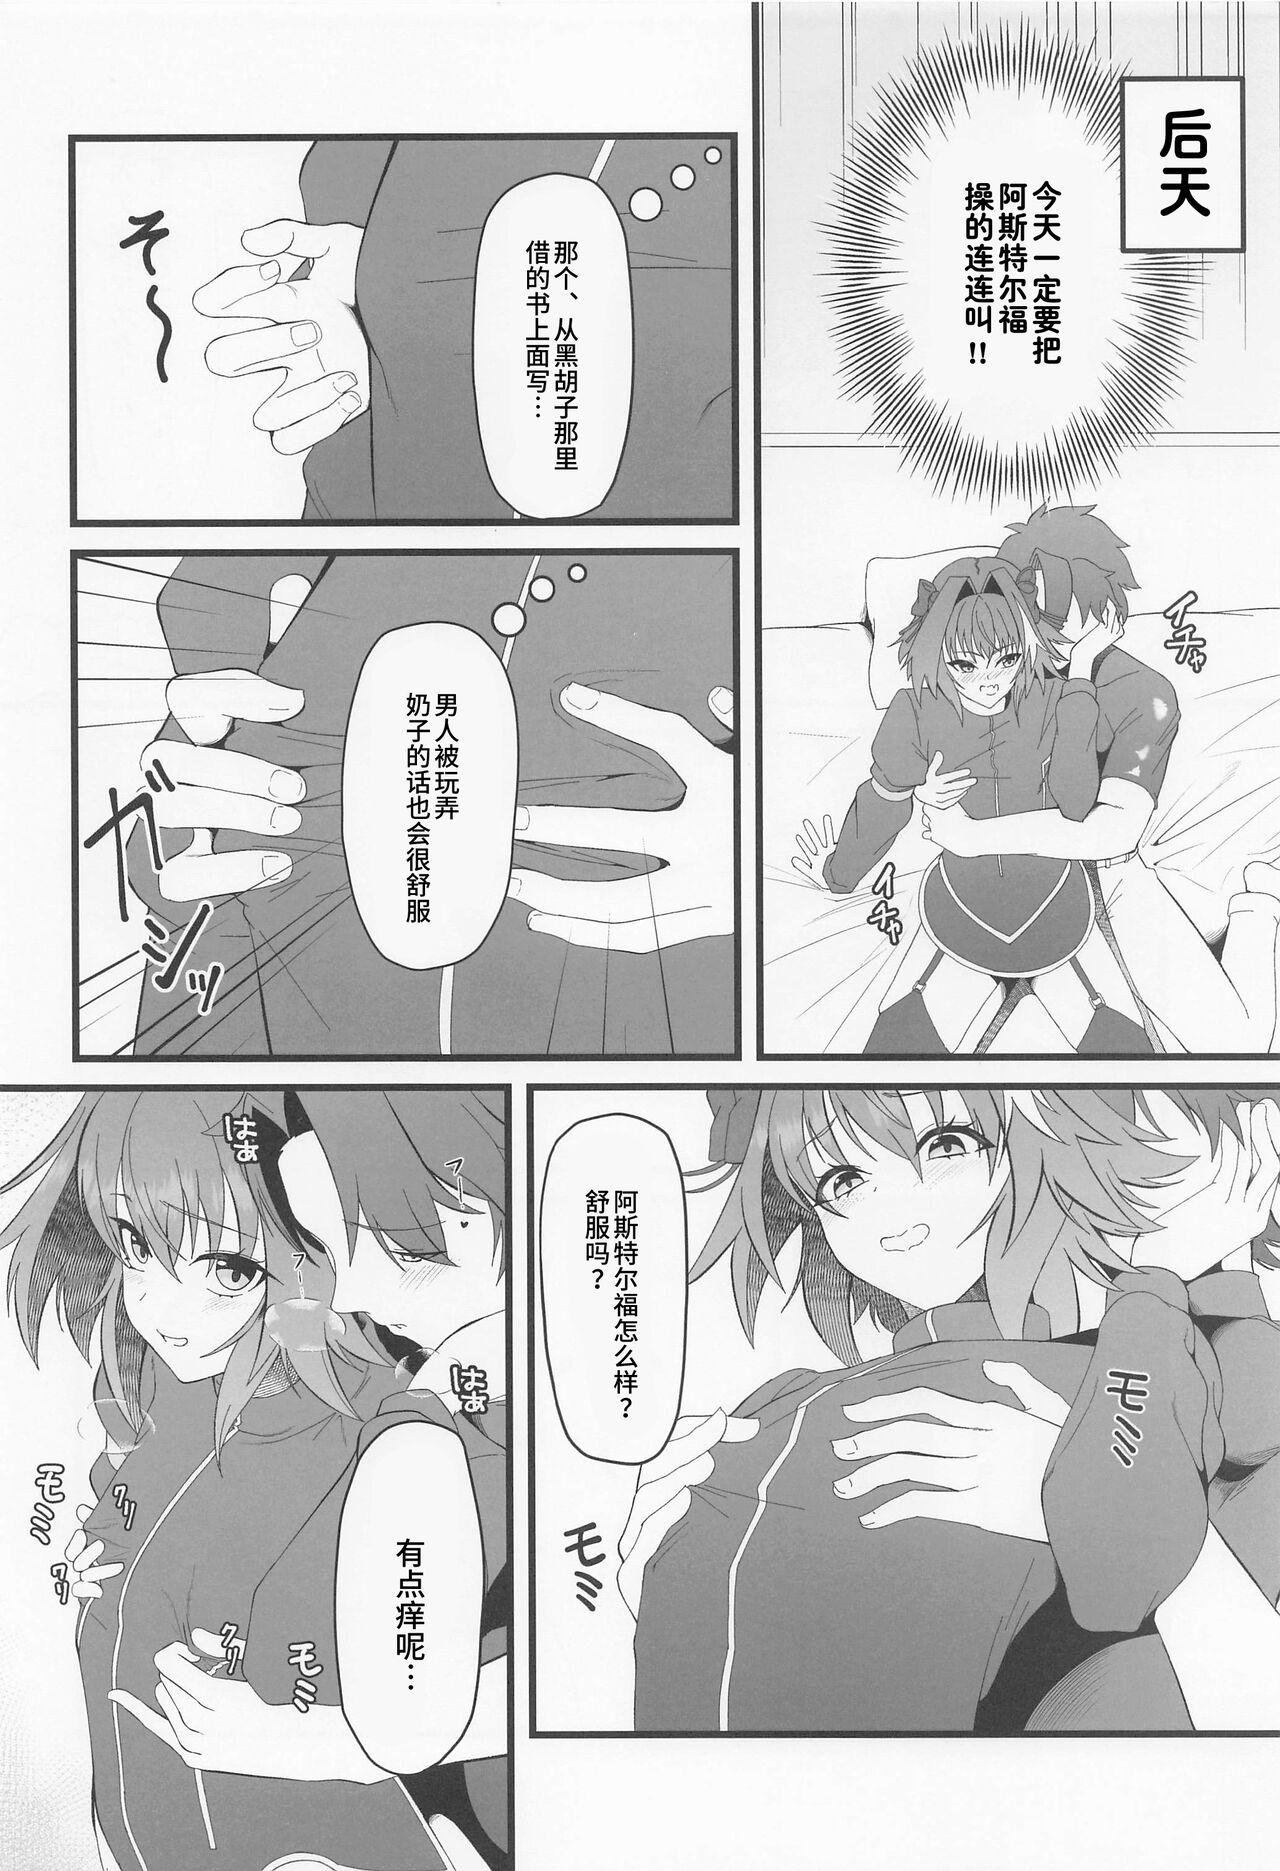 Shorts Kimi no Ichiban ni Naritakute - I wanted to be your number one. - Fate grand order Erotica - Page 5